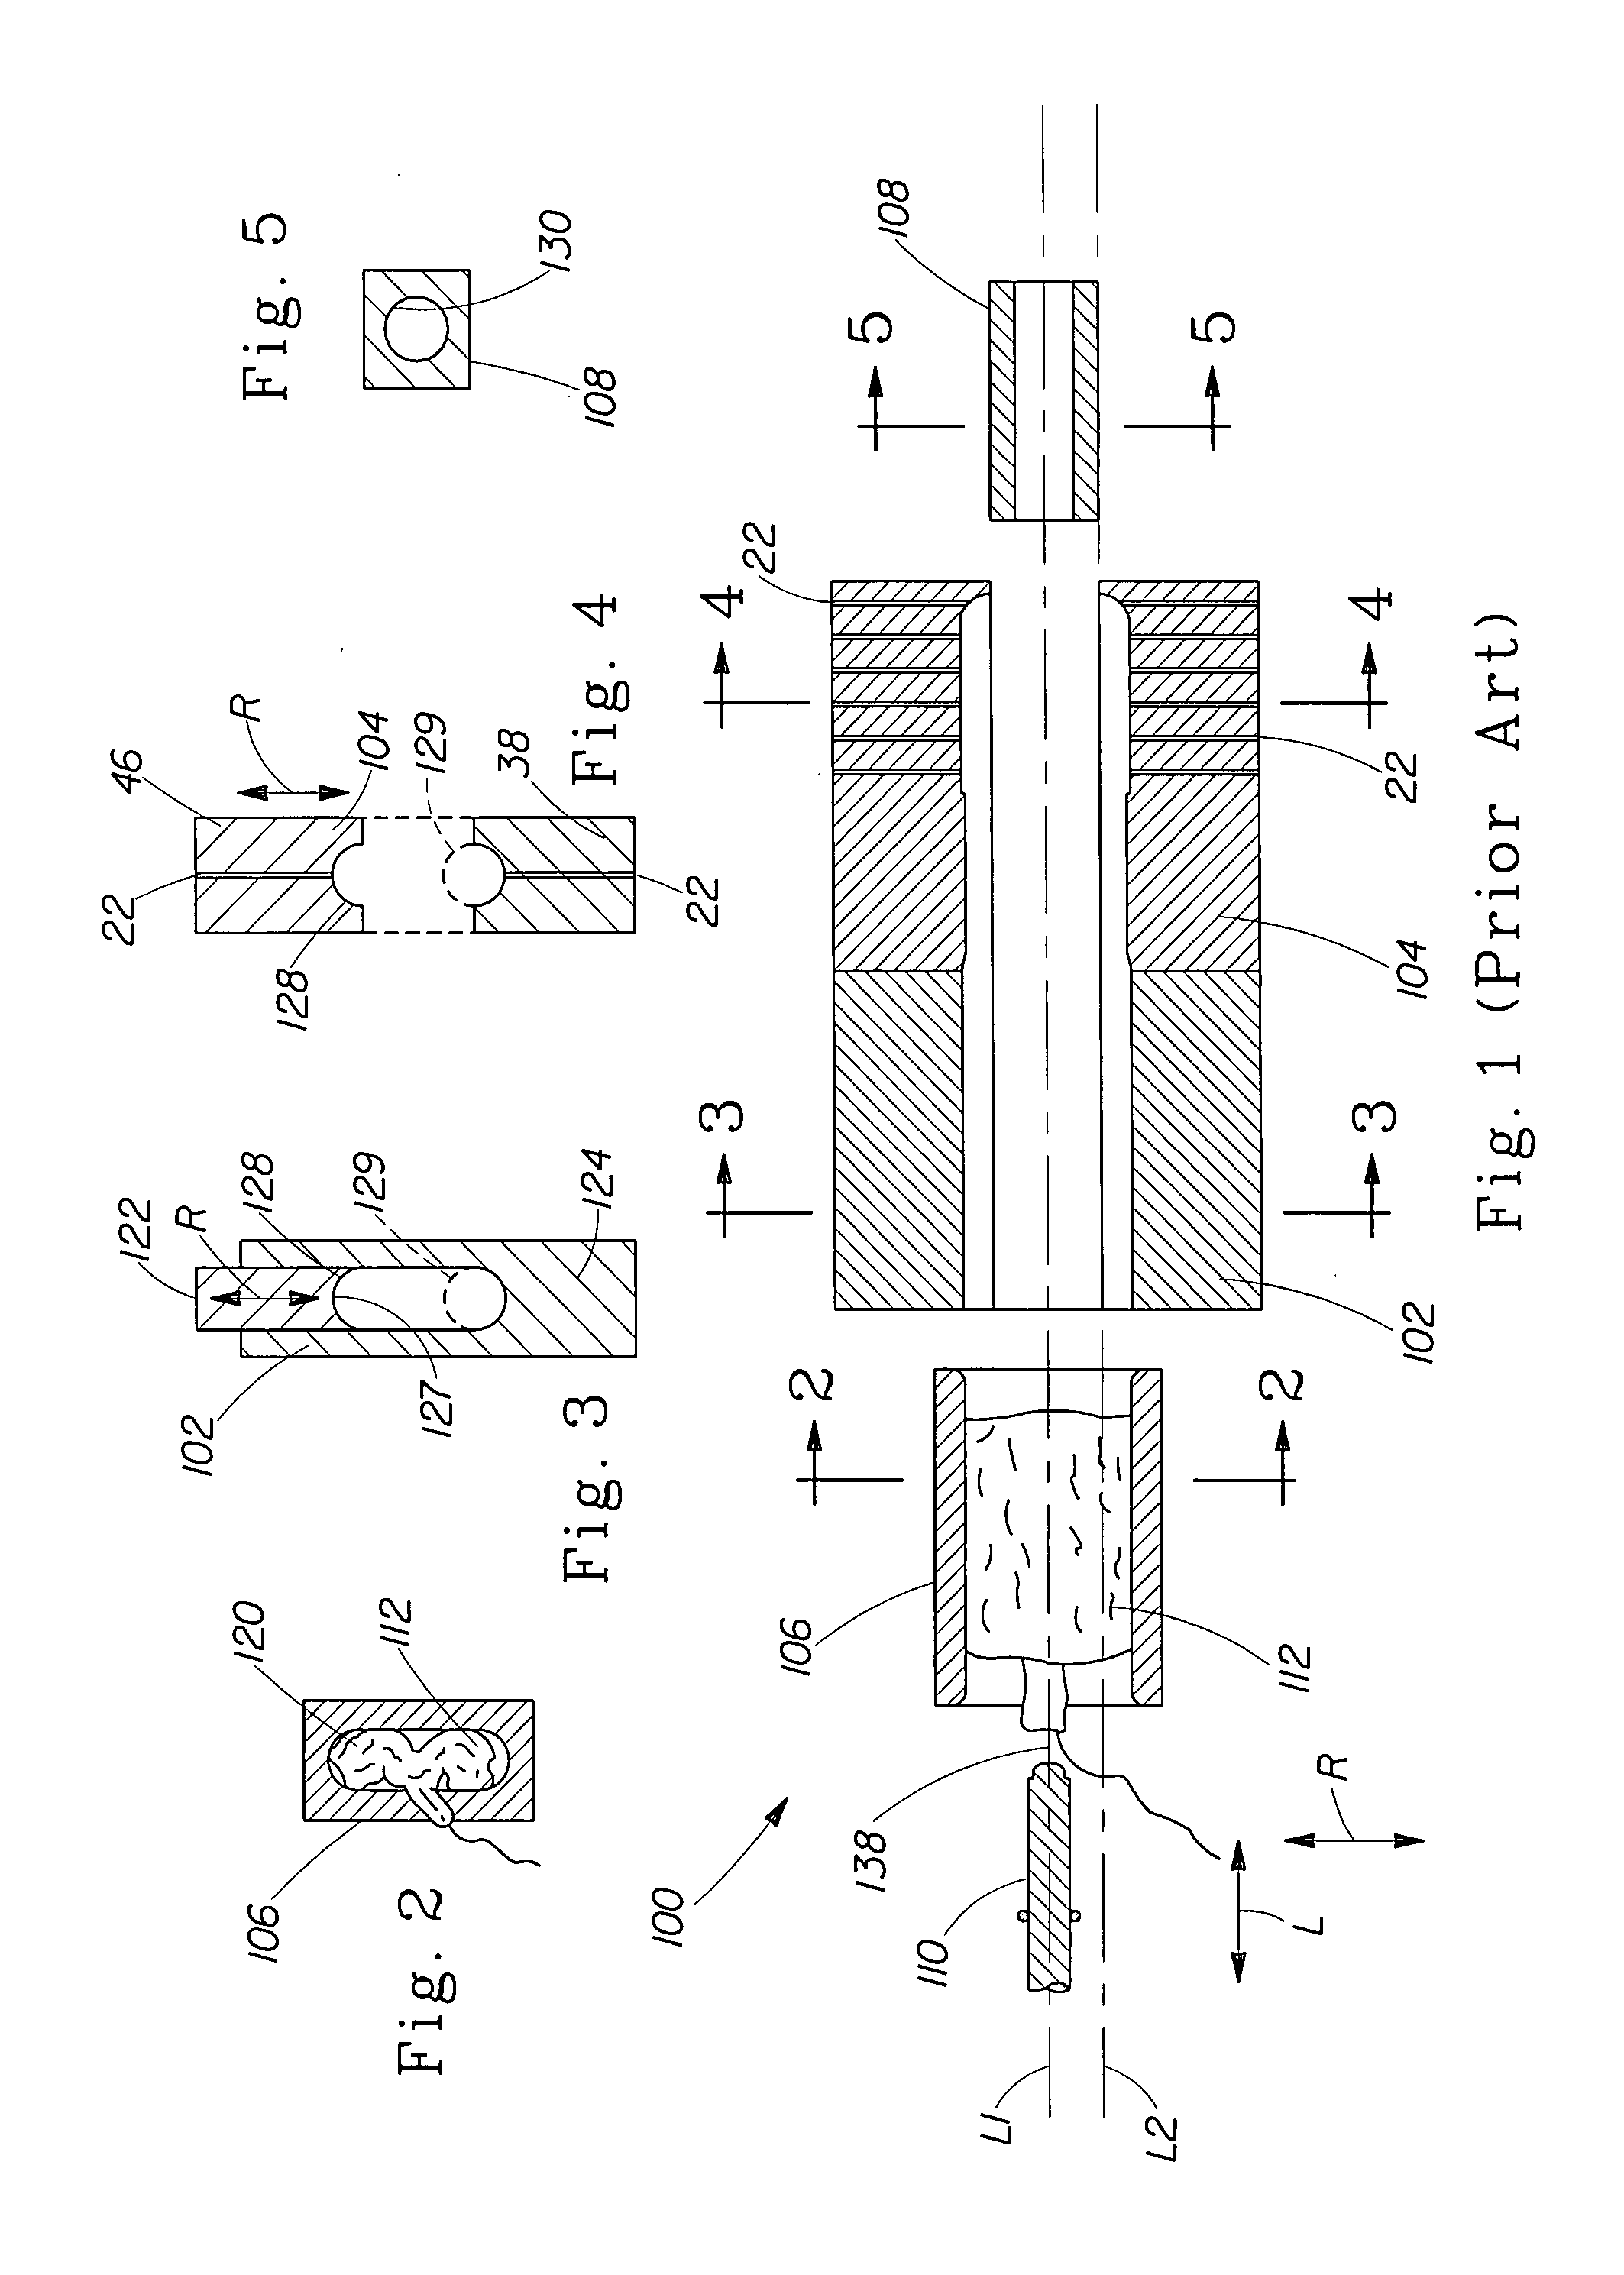 Process for producing folded and compressed tampons